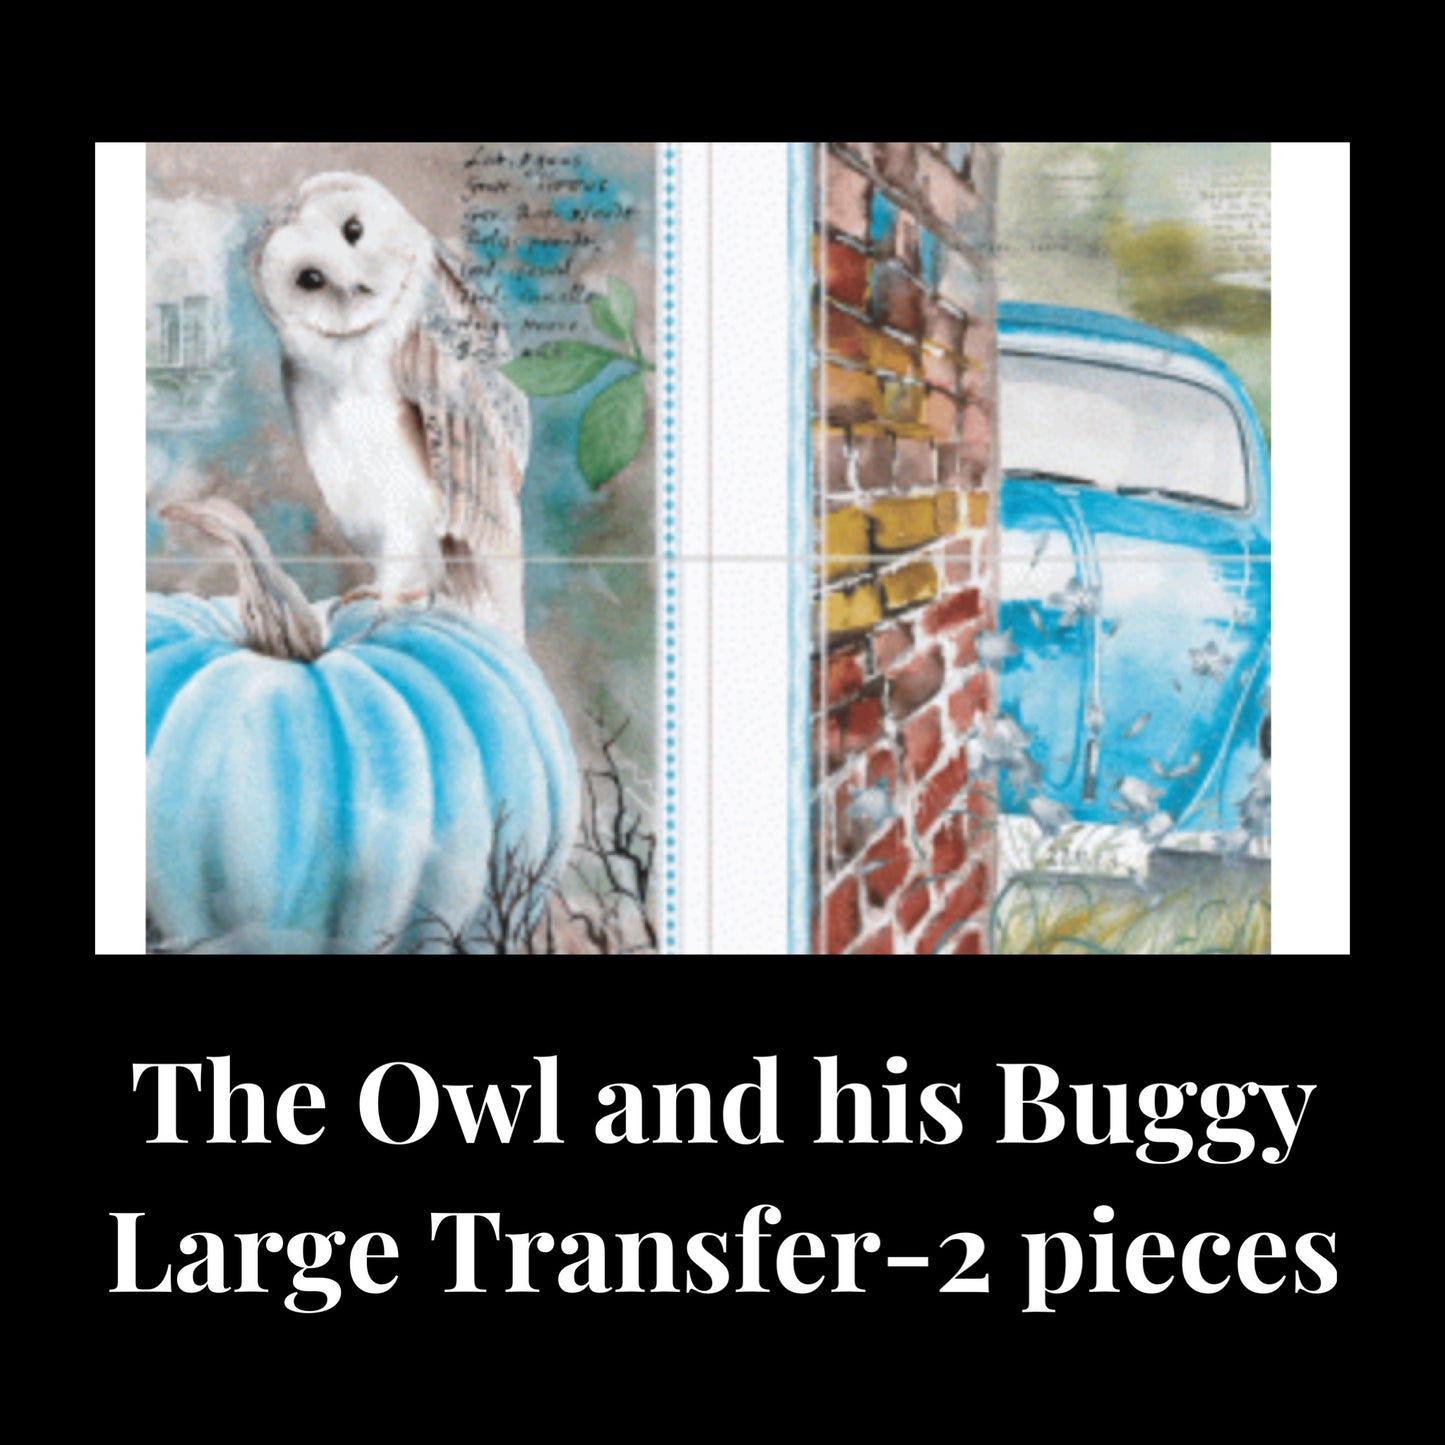 The Owl and his Buggy